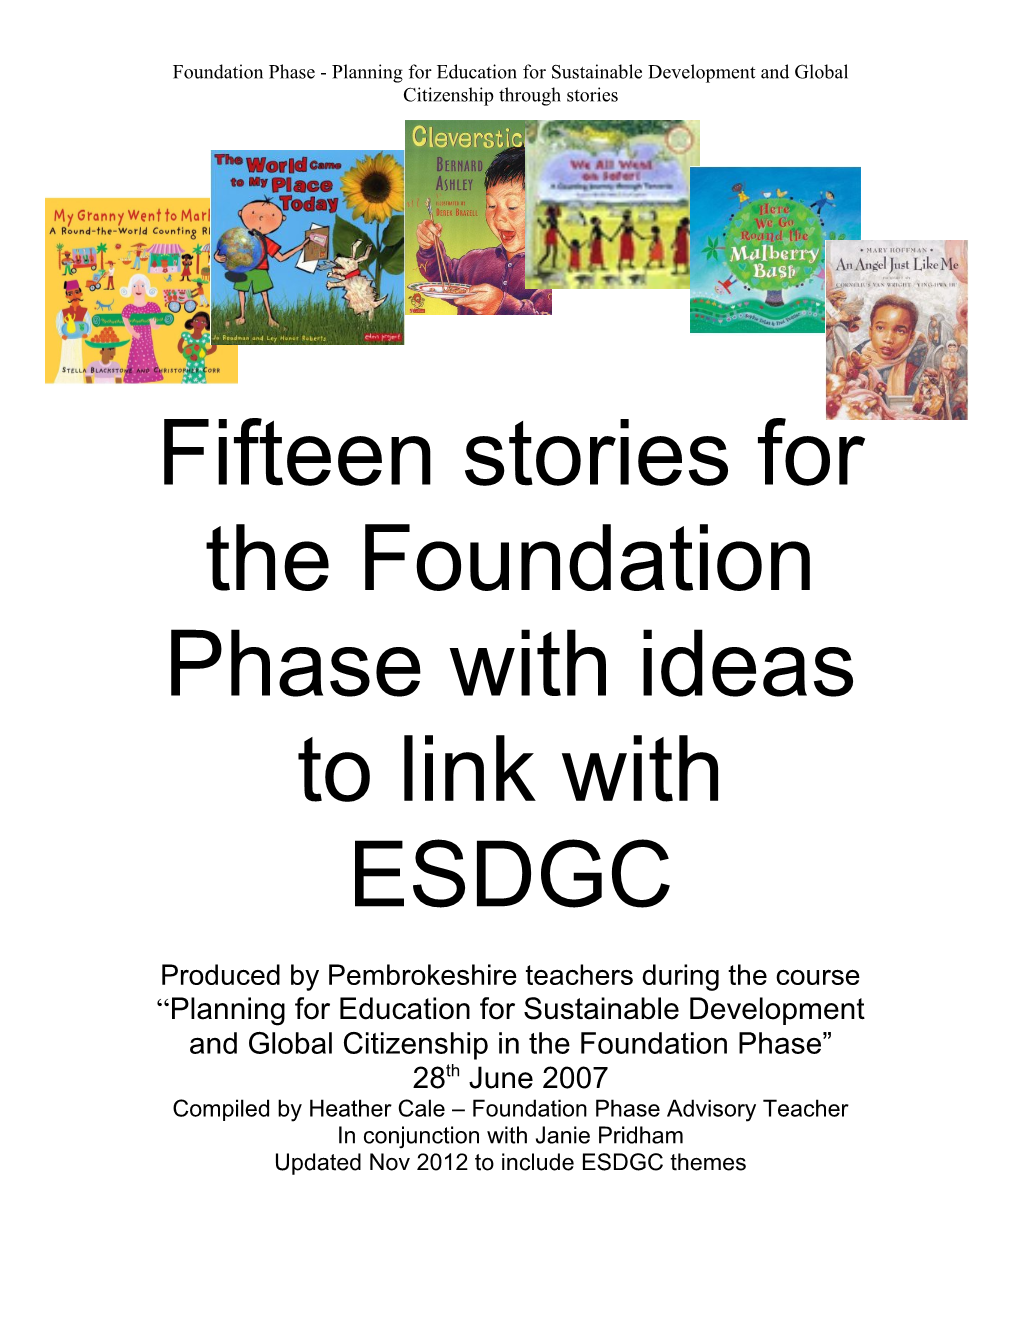 Fifteen Stories for the Foundation Phase with Ideas to Link with ESDGC